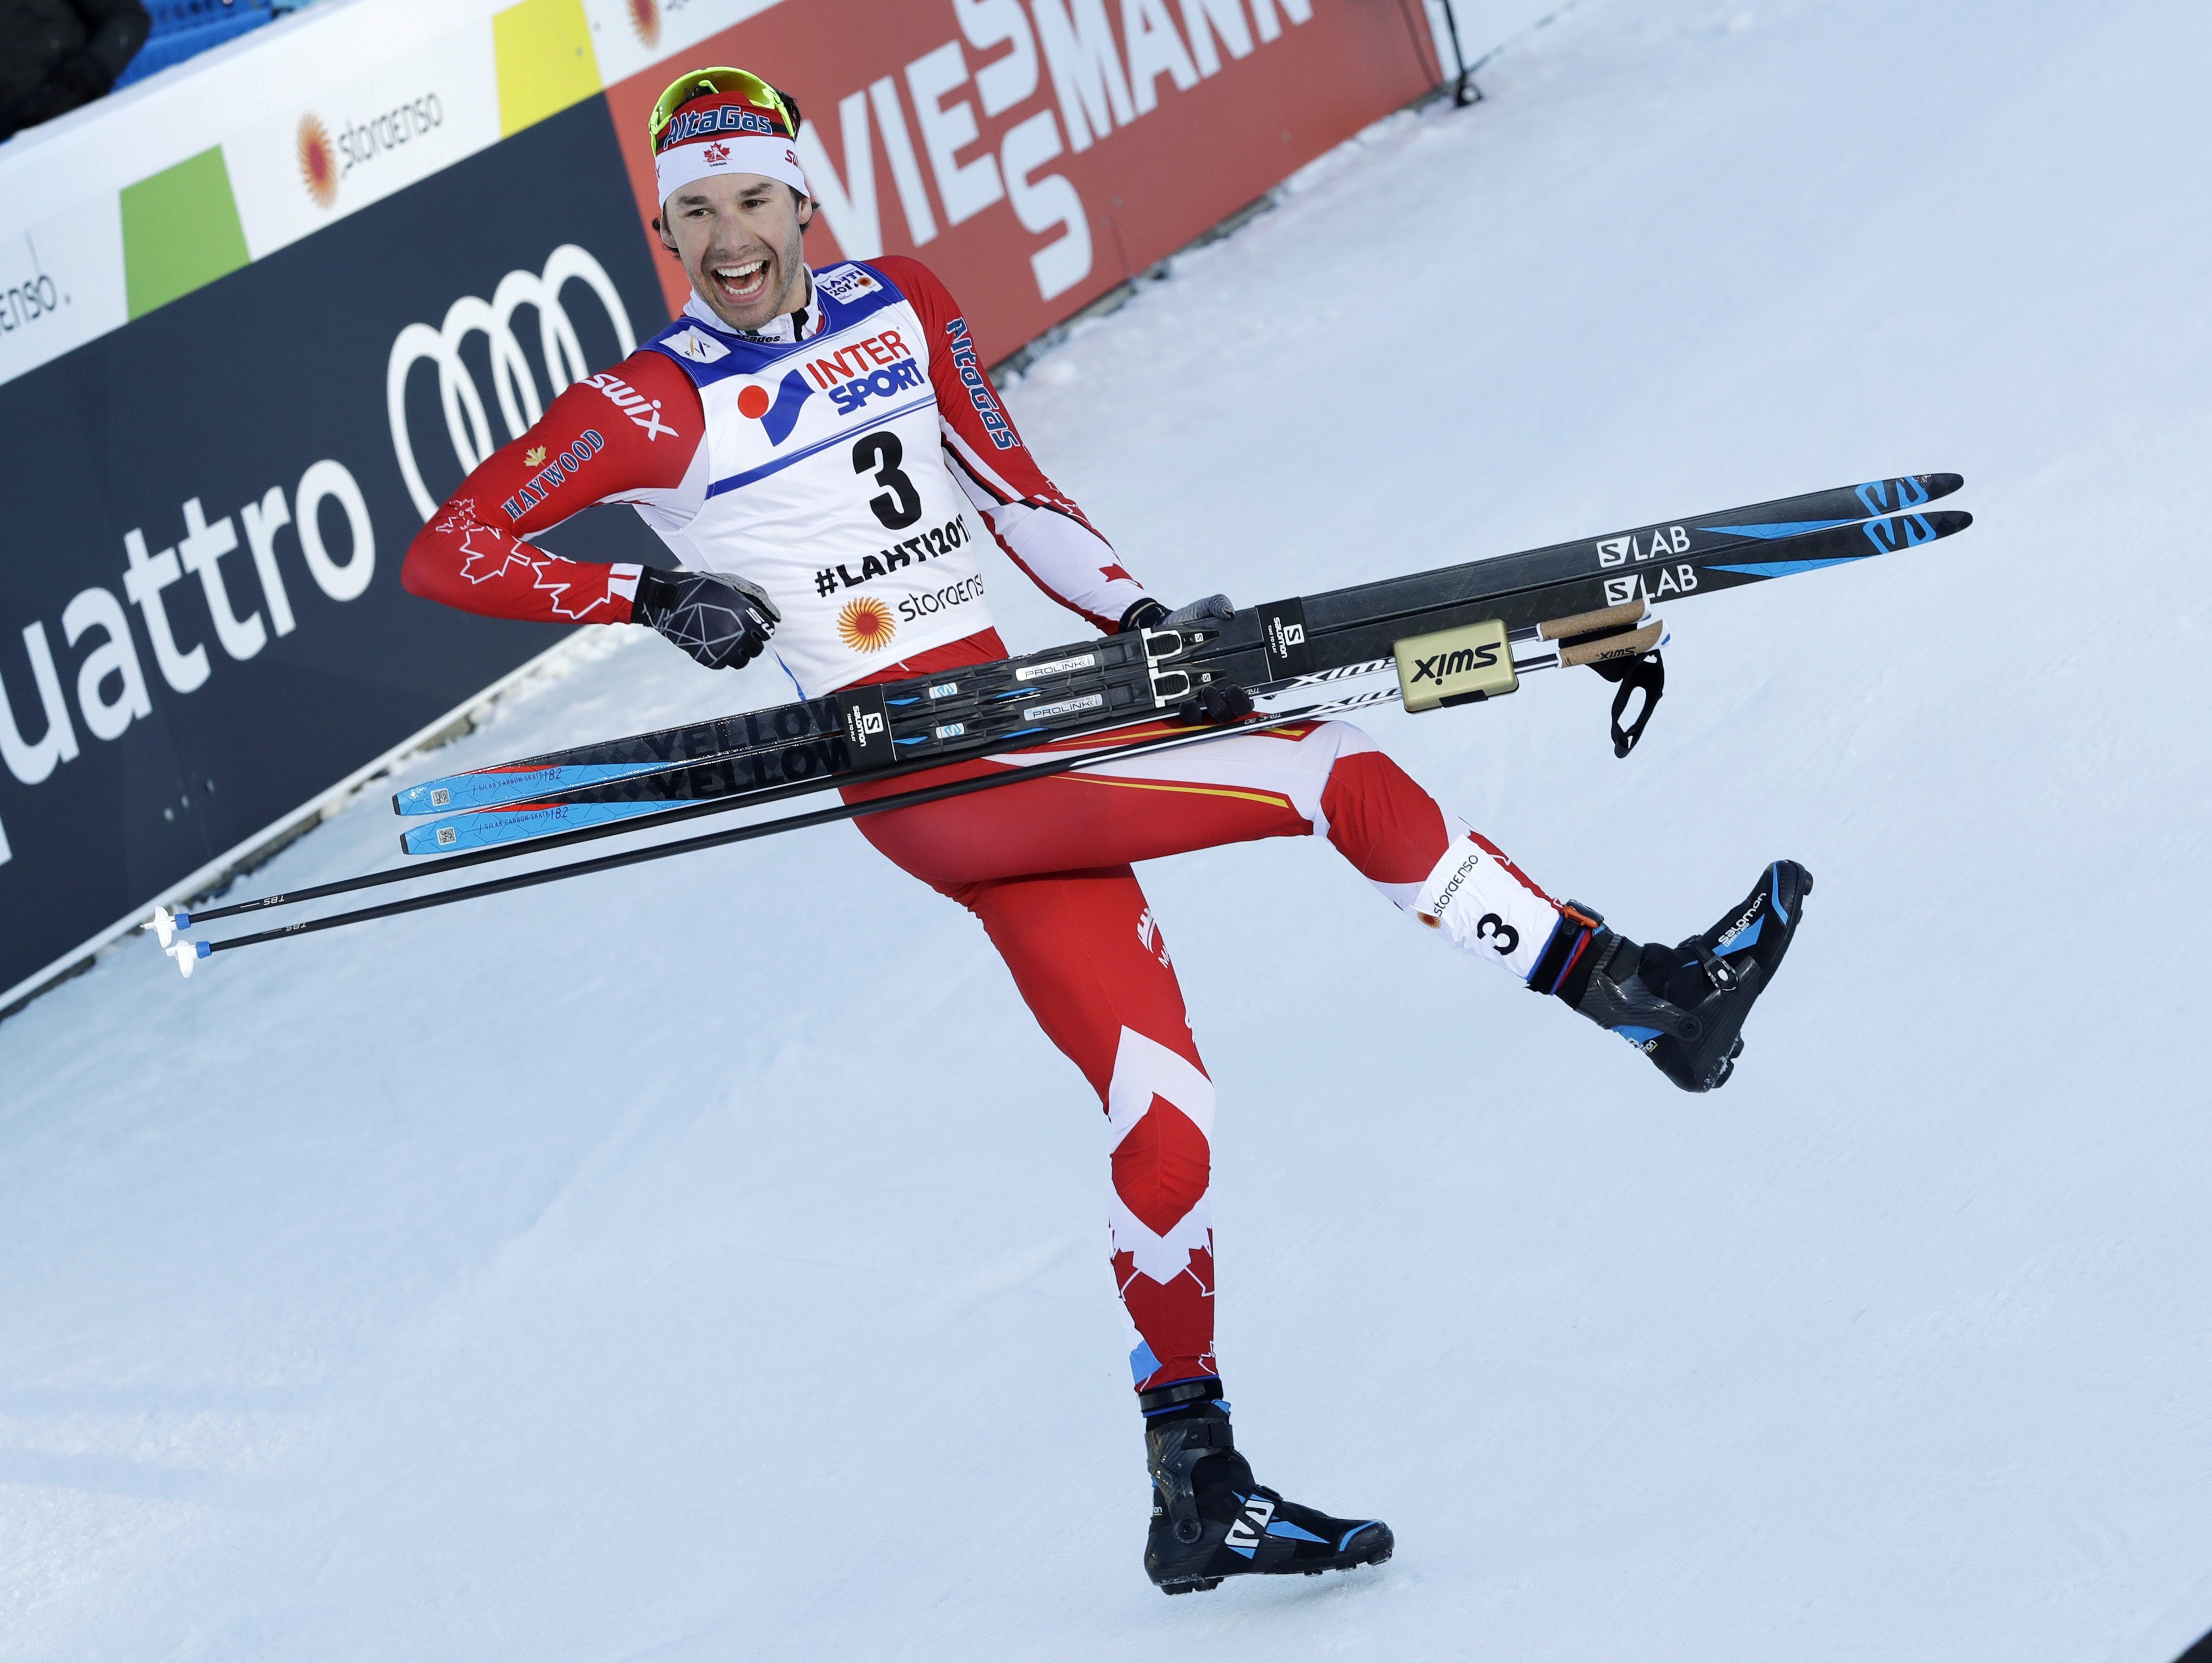 Canada's Alex Harvey celebrates after winning the men's 50 km race during the 2017 Nordic Skiing World Championships in Lahti, Finland, Sunday, March 5, 2017. (AP Photo/Matthias Schrader)